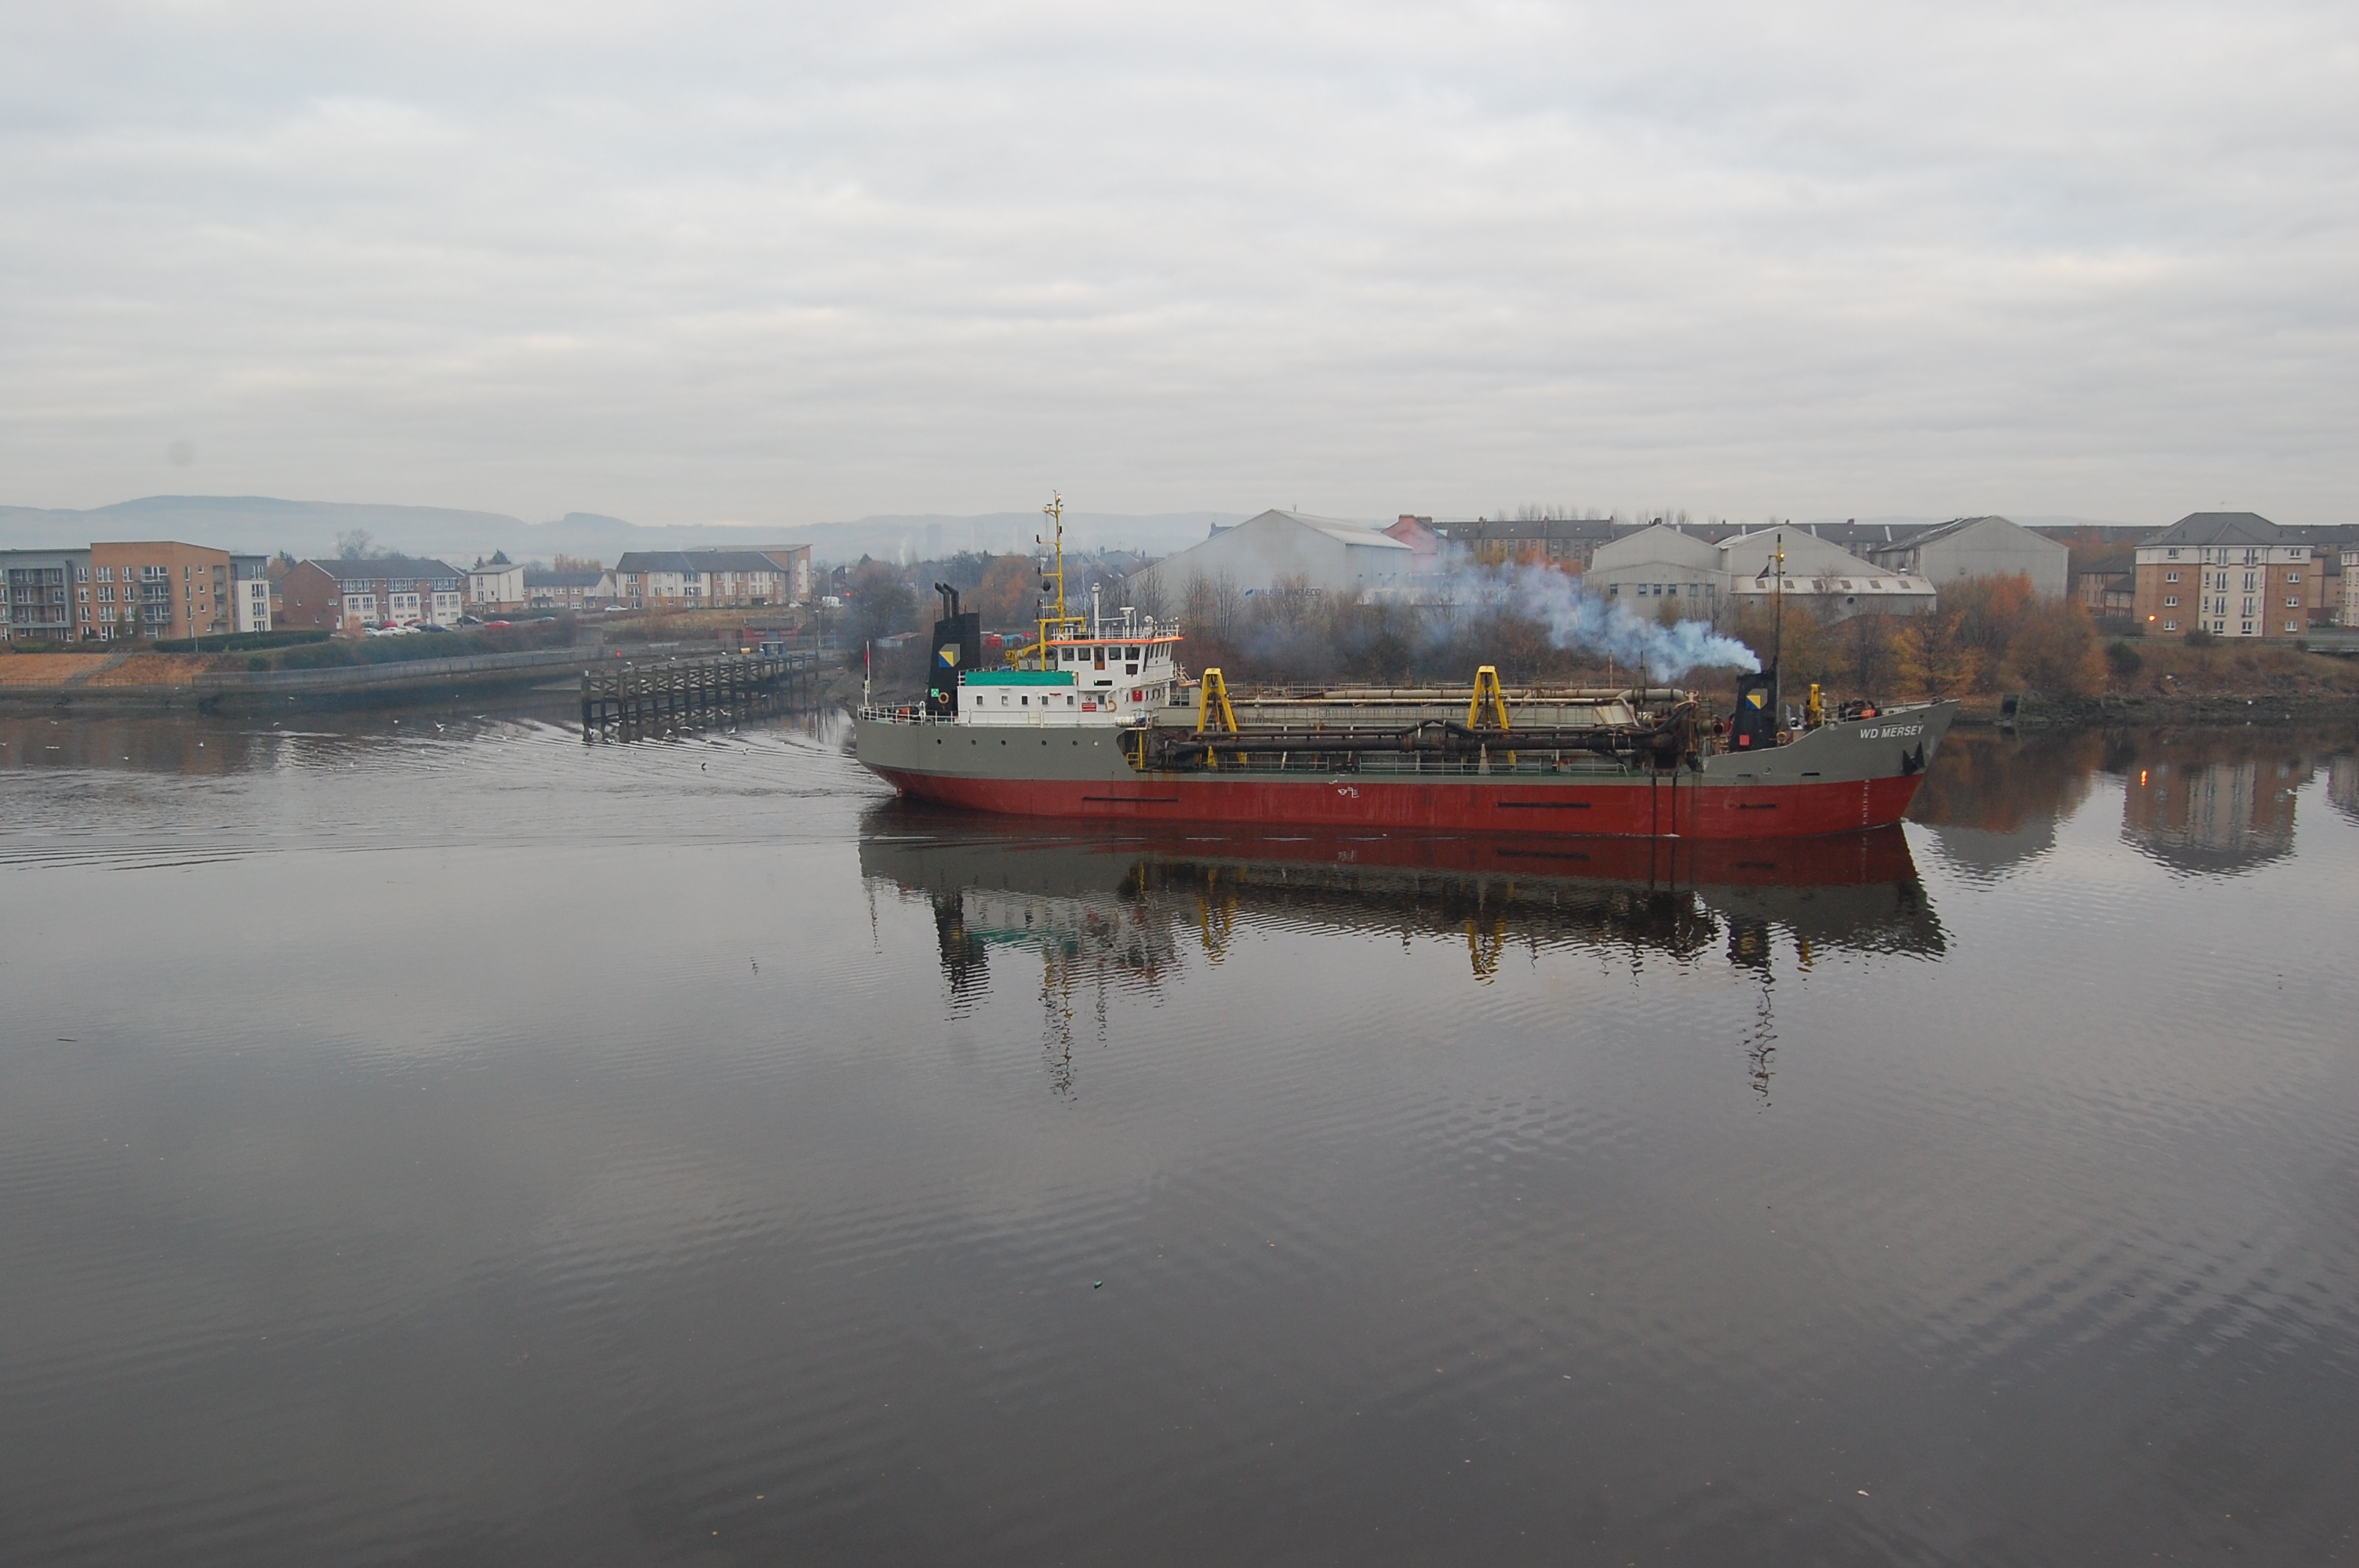 Dredge ship WD Mersey on the Clyde on 2013 11 24 -b